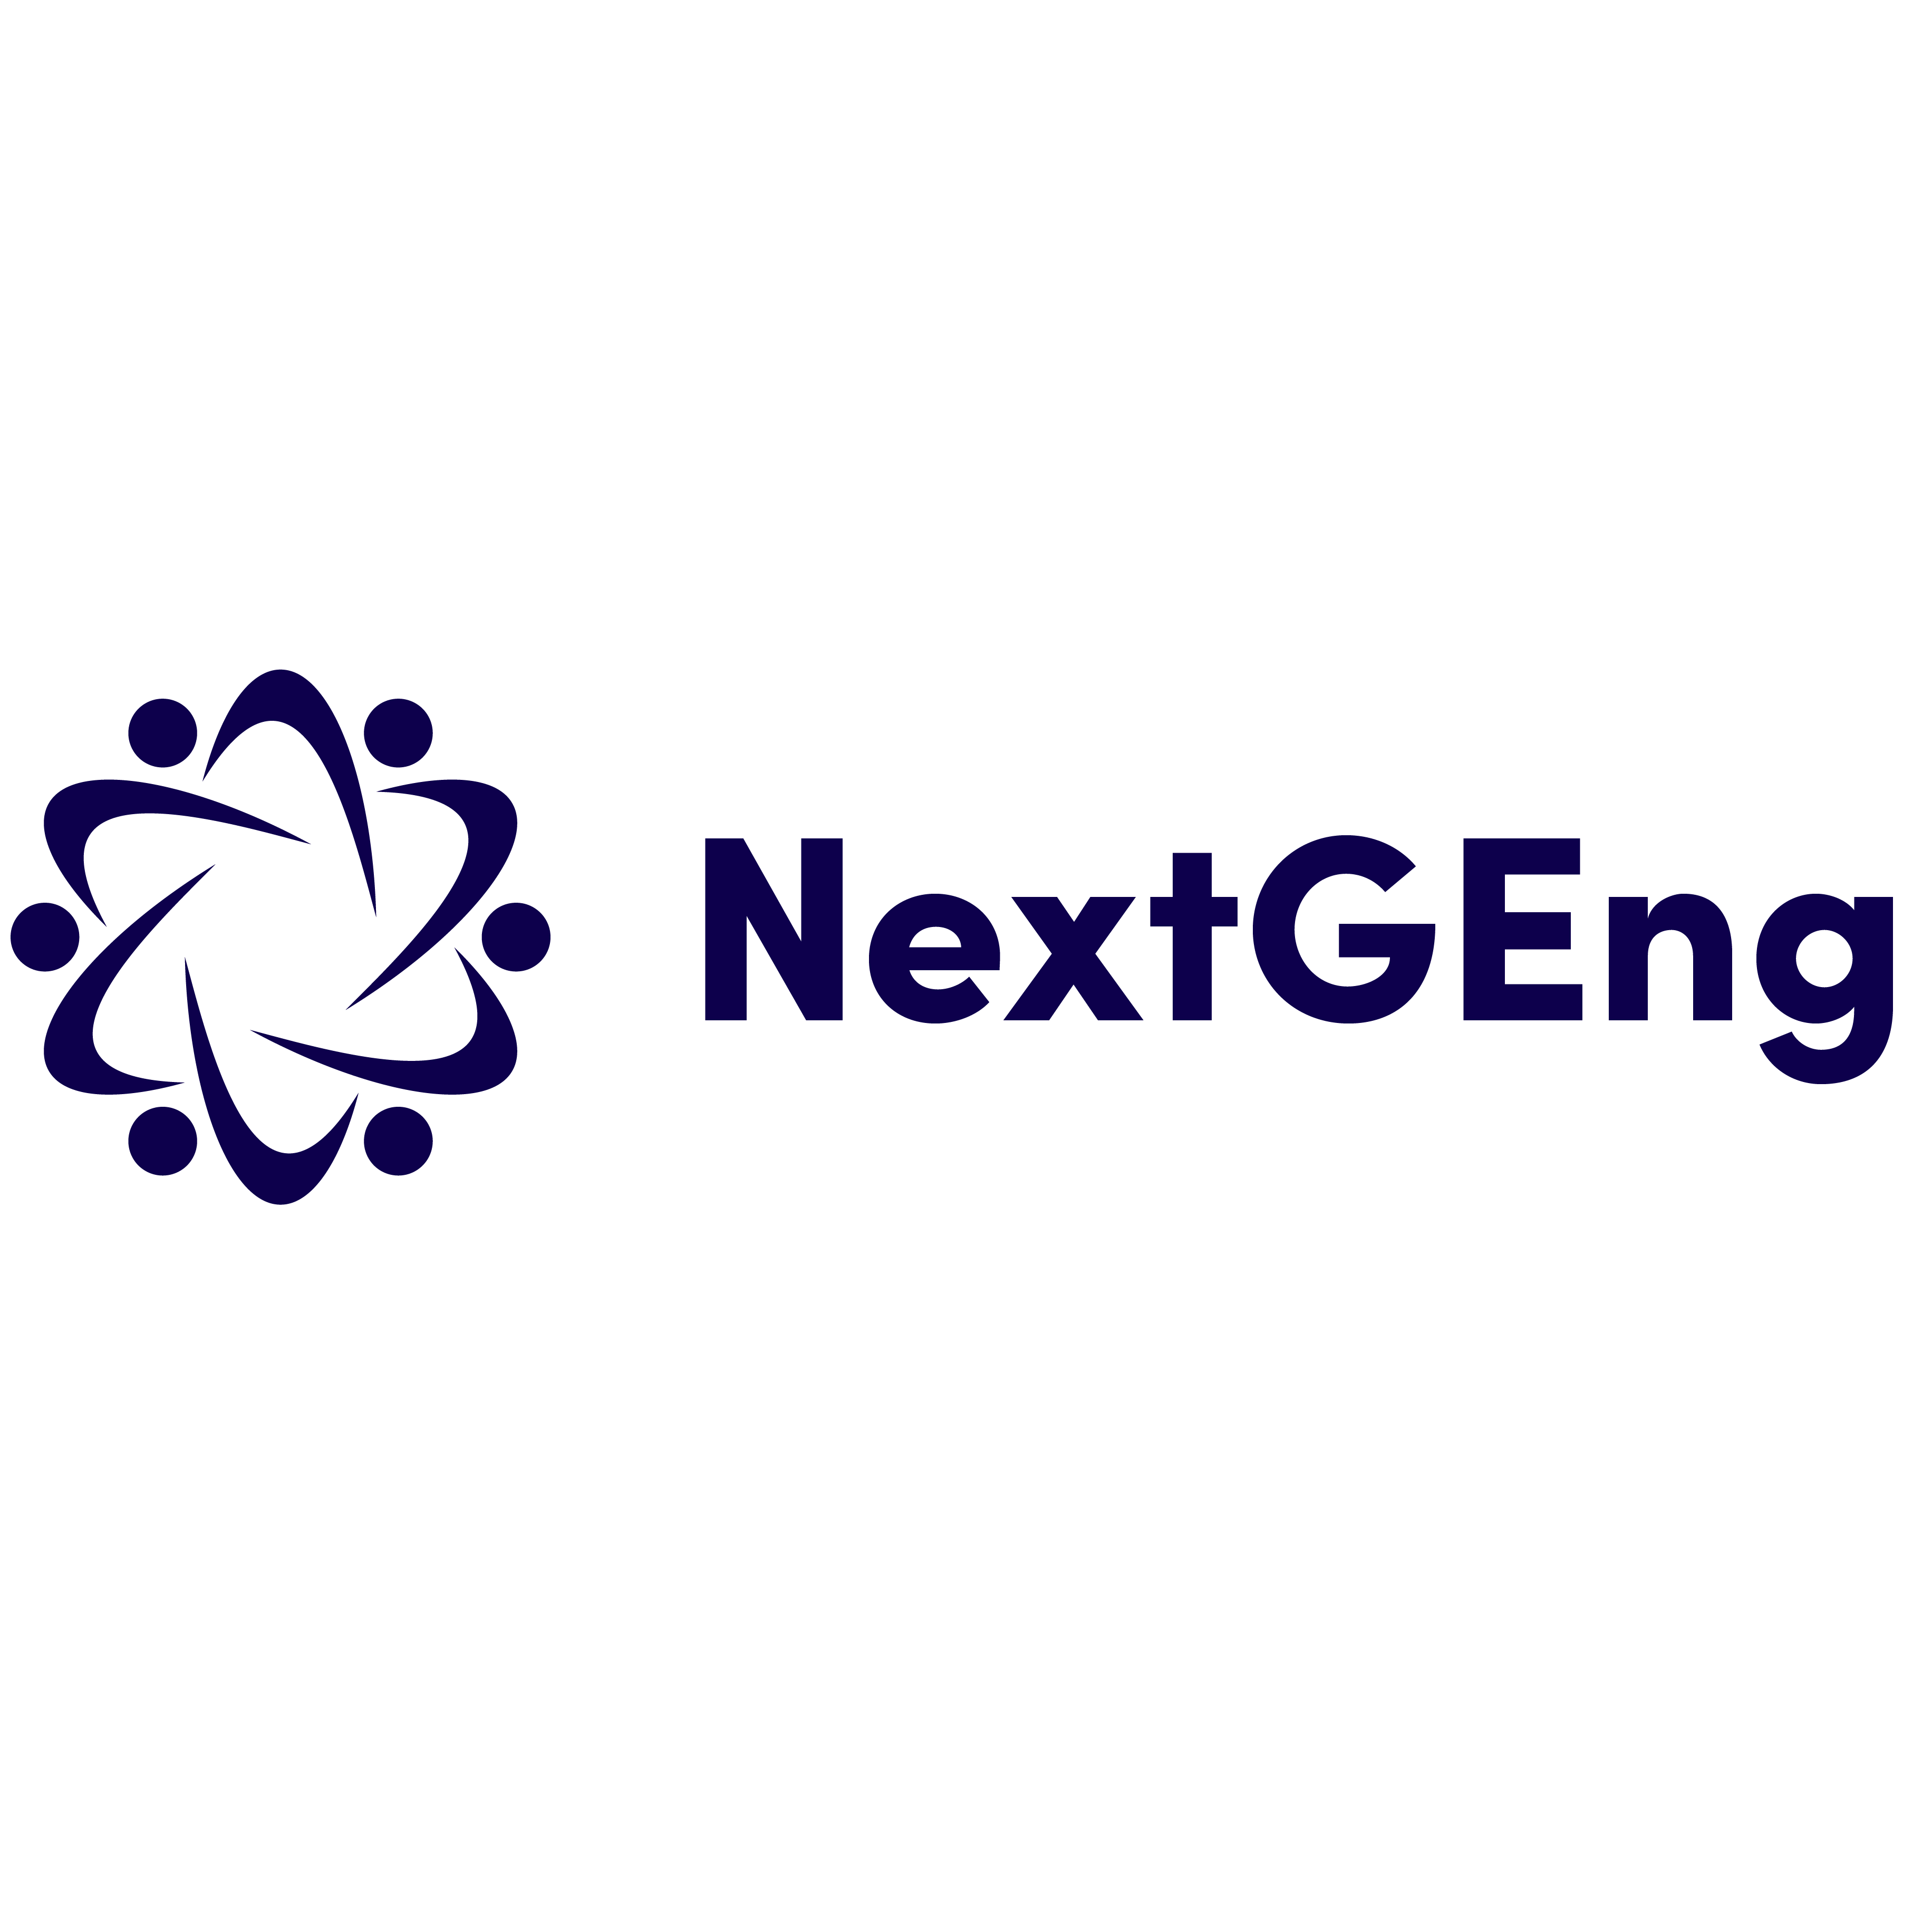 https://ifme2022.com/wp-content/uploads/2022/11/NextGEng-logo-with-text-blue-2.png